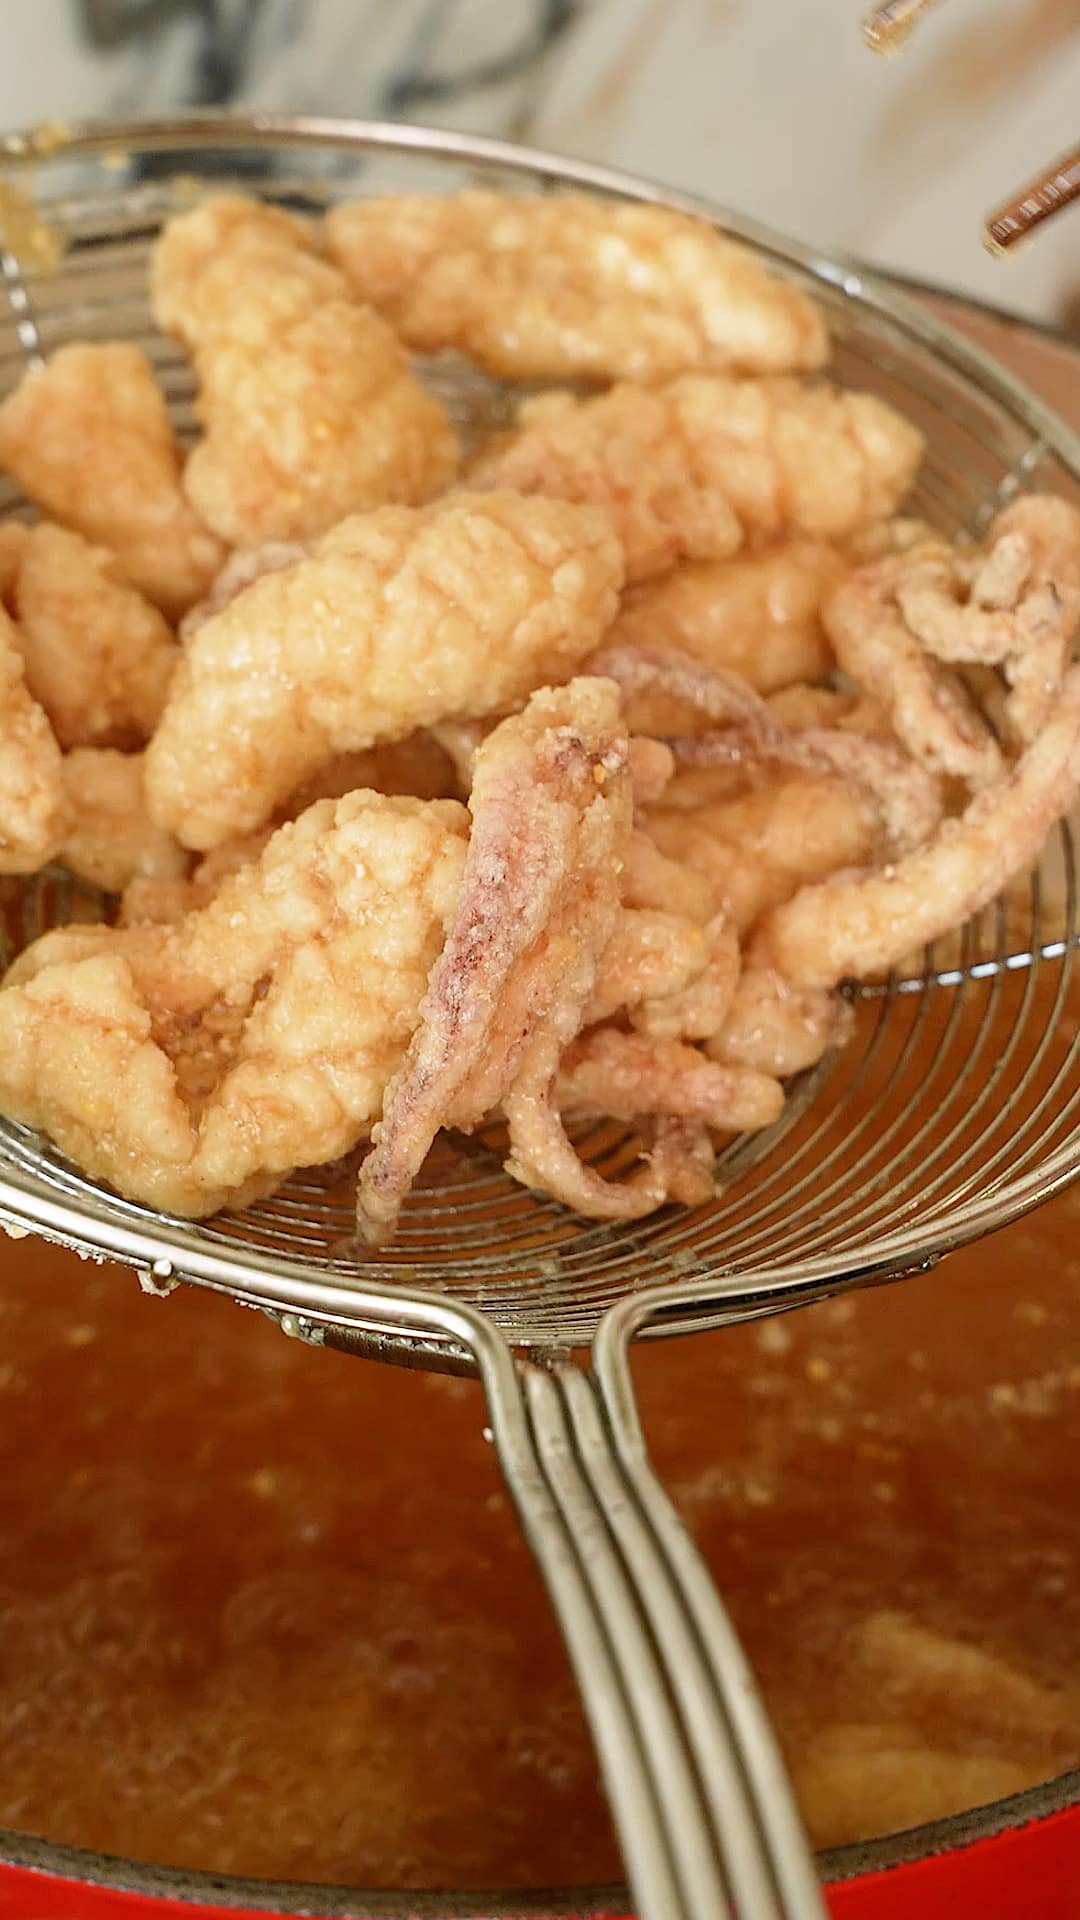 Freshly fried squid being drained from the frying oil by a mesh strainer.